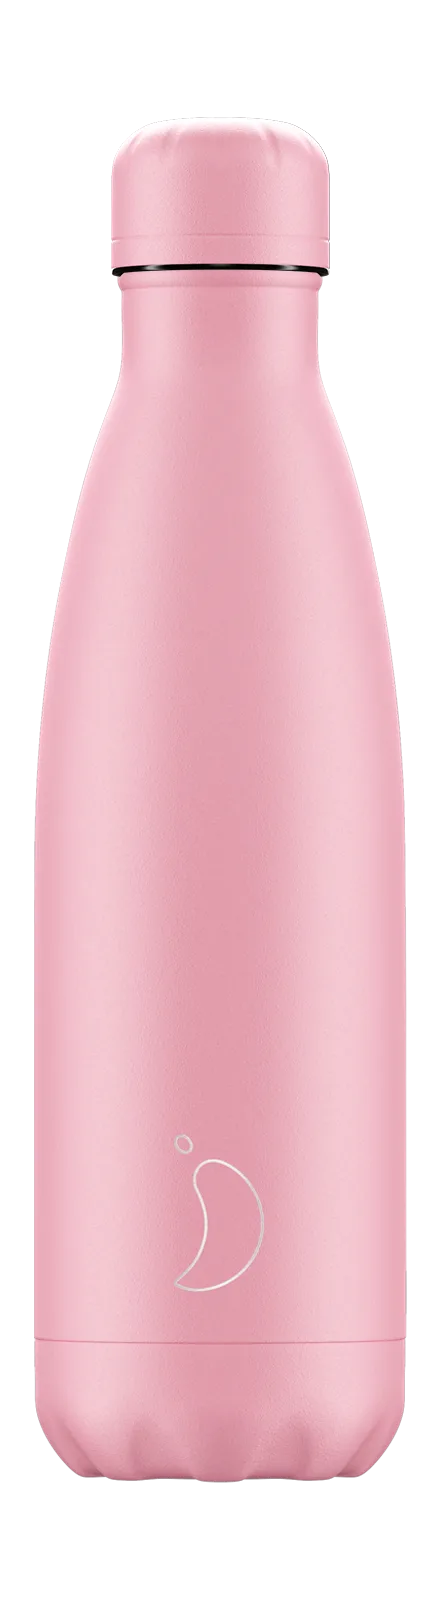 Chilly's Bottle | Pastel Pink | 500ml